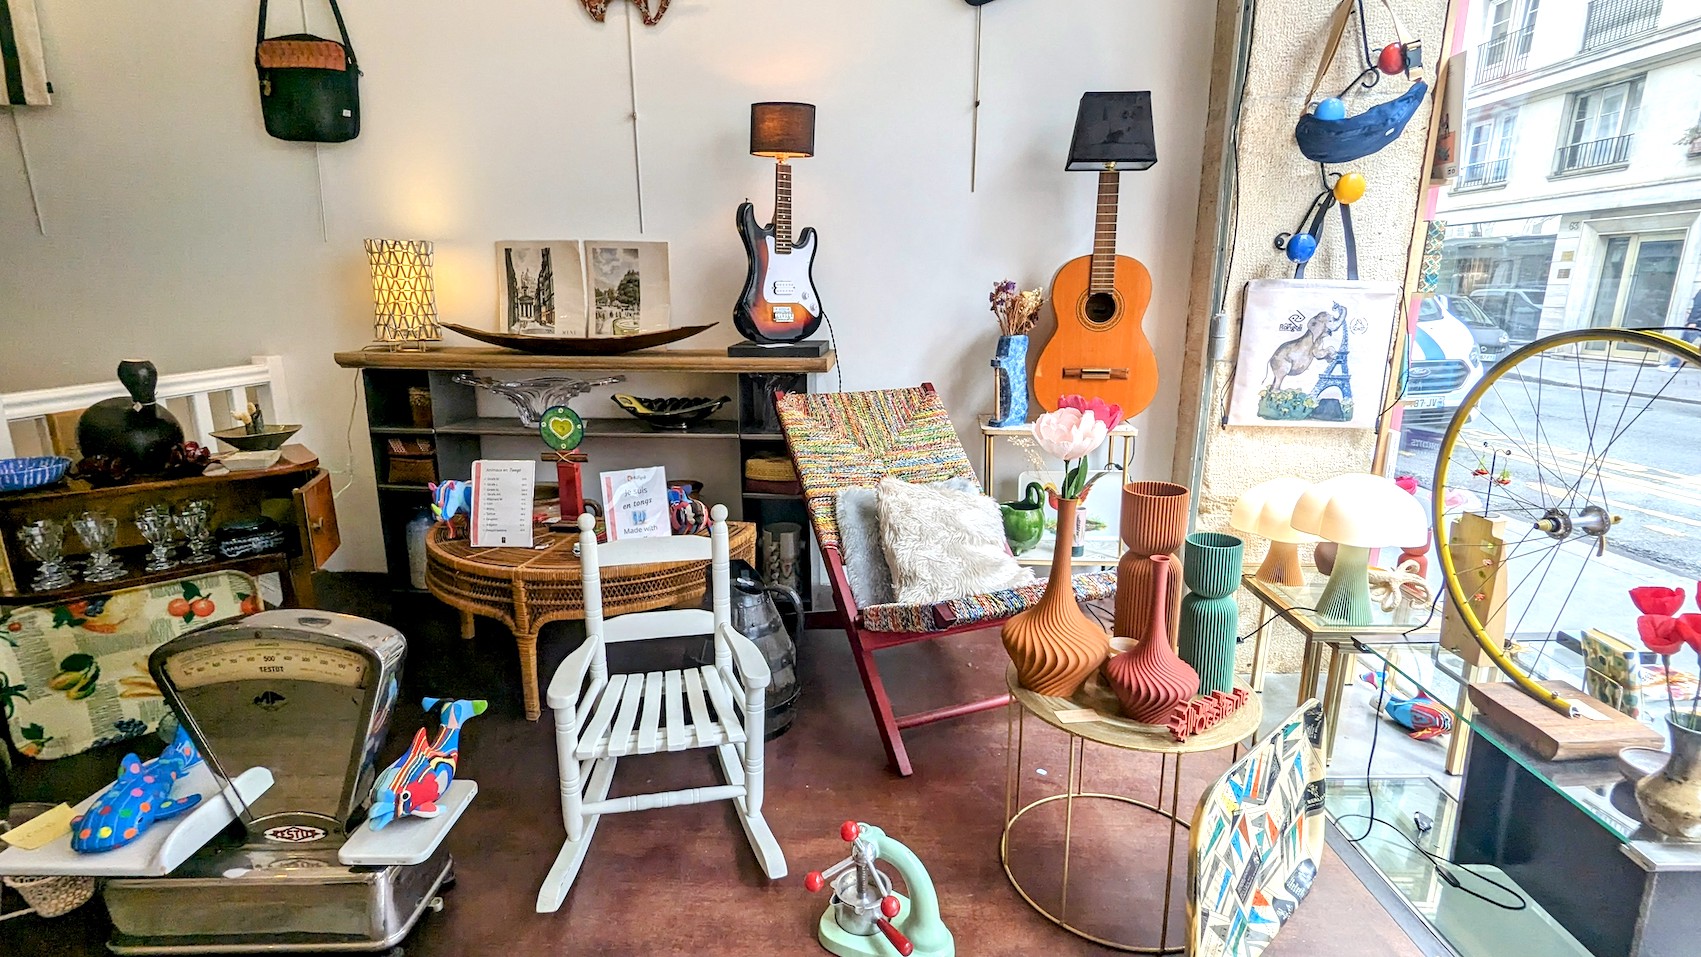 The sustainable products such as recycled guitar lamps and flip flop animals in the Rue Rangoli boutique in Paris.